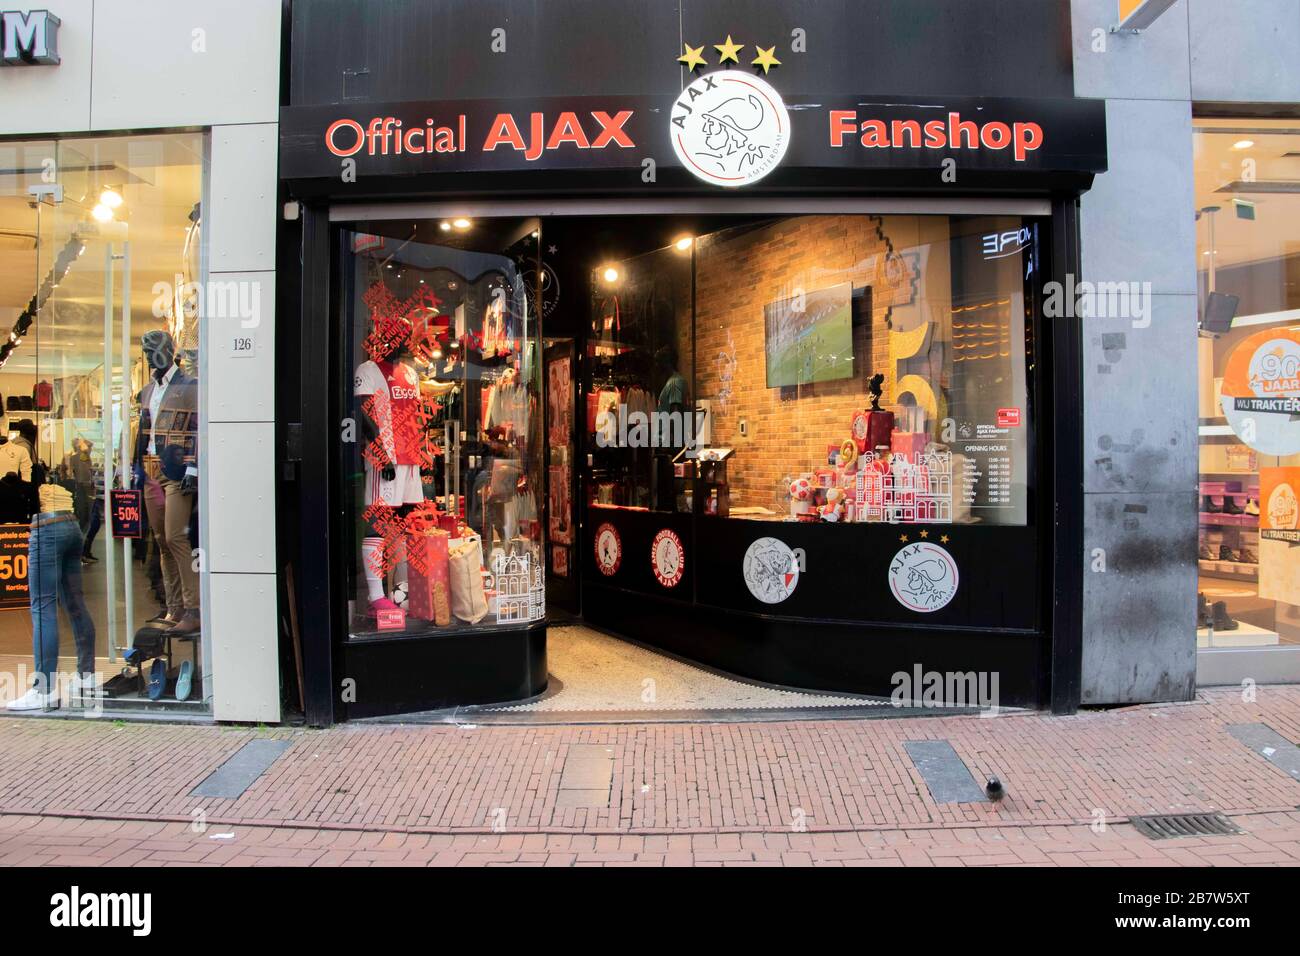 Official Ajax Fan Shop At Amsterdam The Netherlands 2019 Stock Photo -